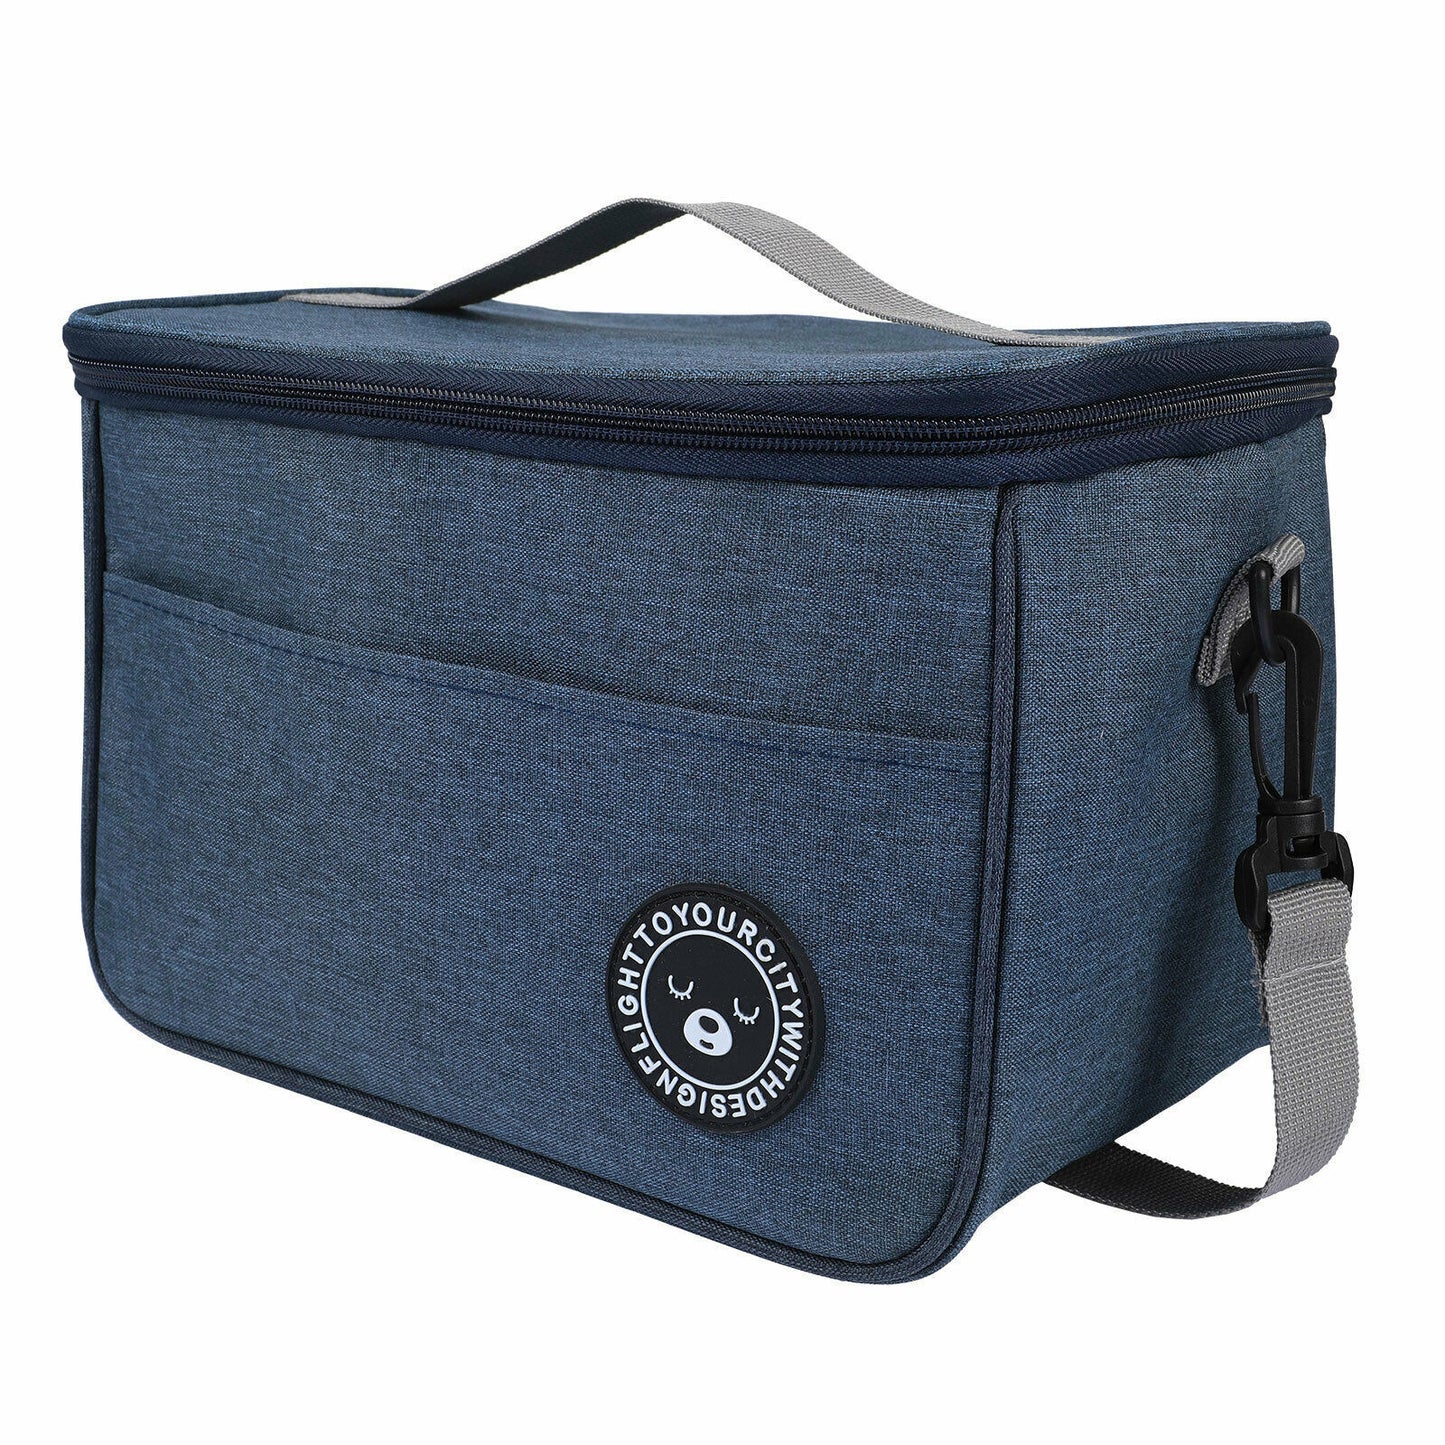 Insulated Lunch Bag - Reusable Lunch Tote Bag for Outdoor Activities